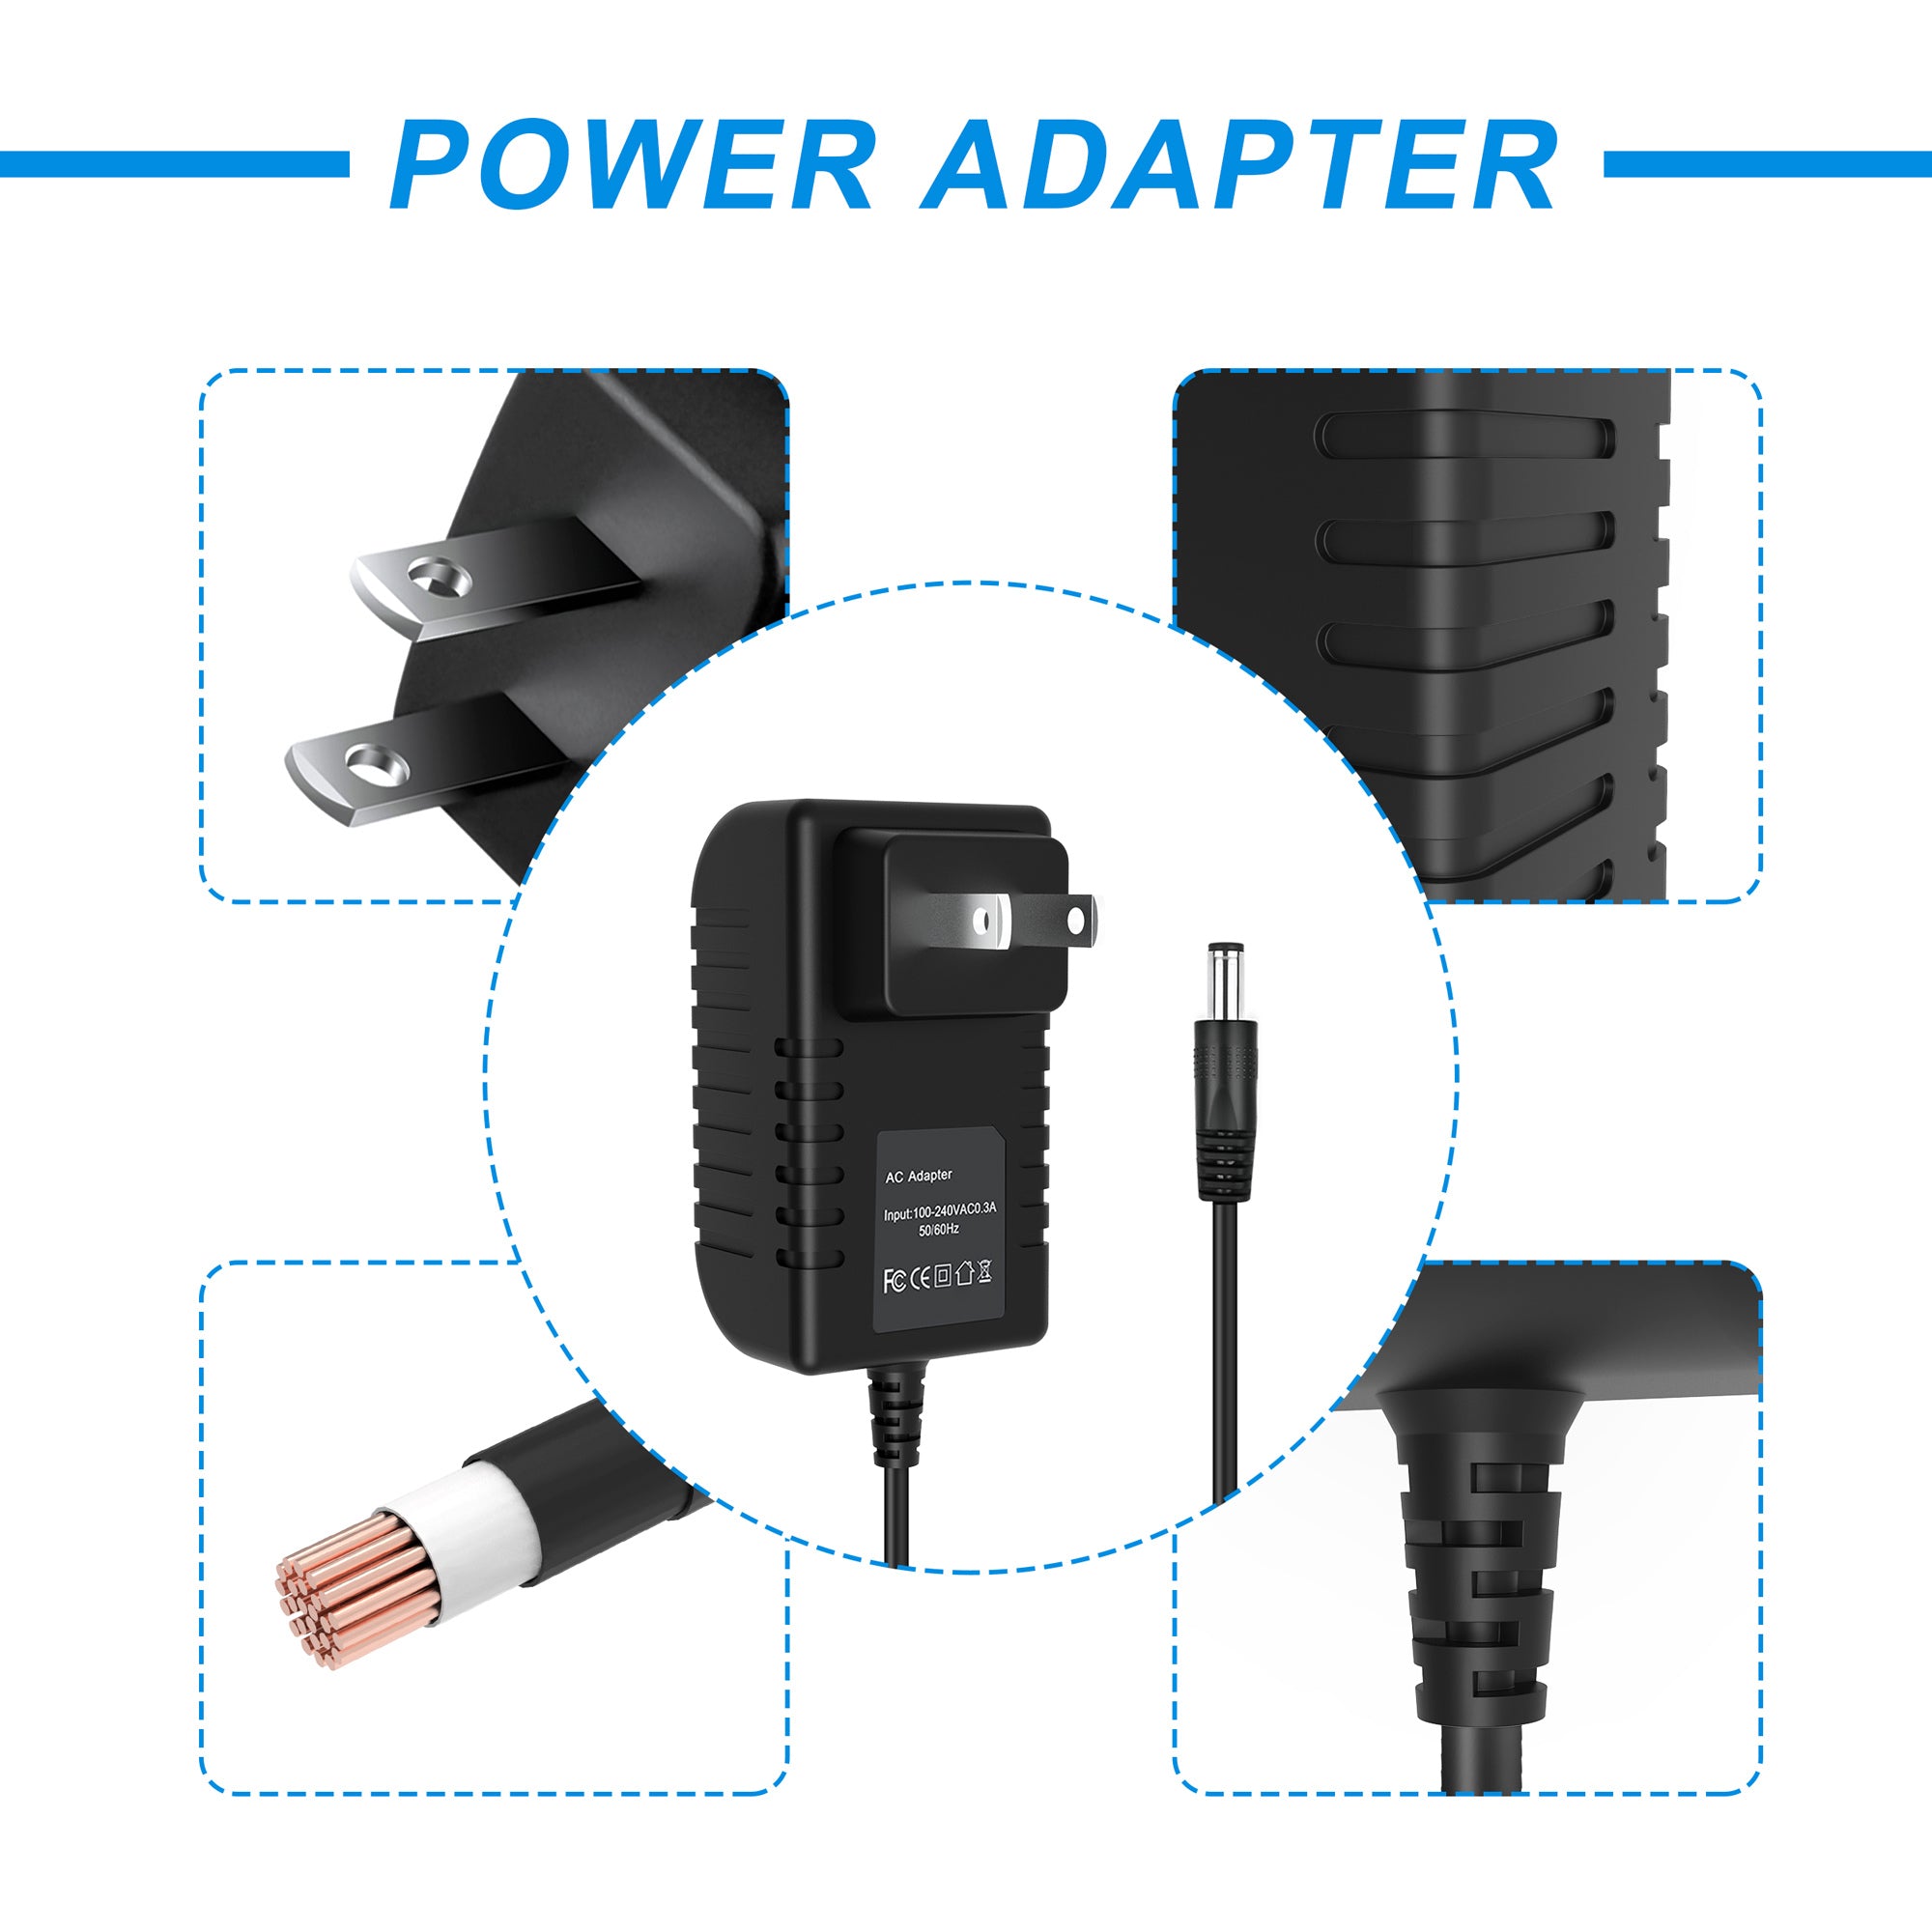 AbleGrid AC/DC Adapter Compatible with Hannspree HANNSpad SN14TP1B2A SN14TP1B SN14TP1 HSG1351 133 Titan2 Tablet Power Supply Cord Cable PS Wall Home Battery Charger Mains PSU